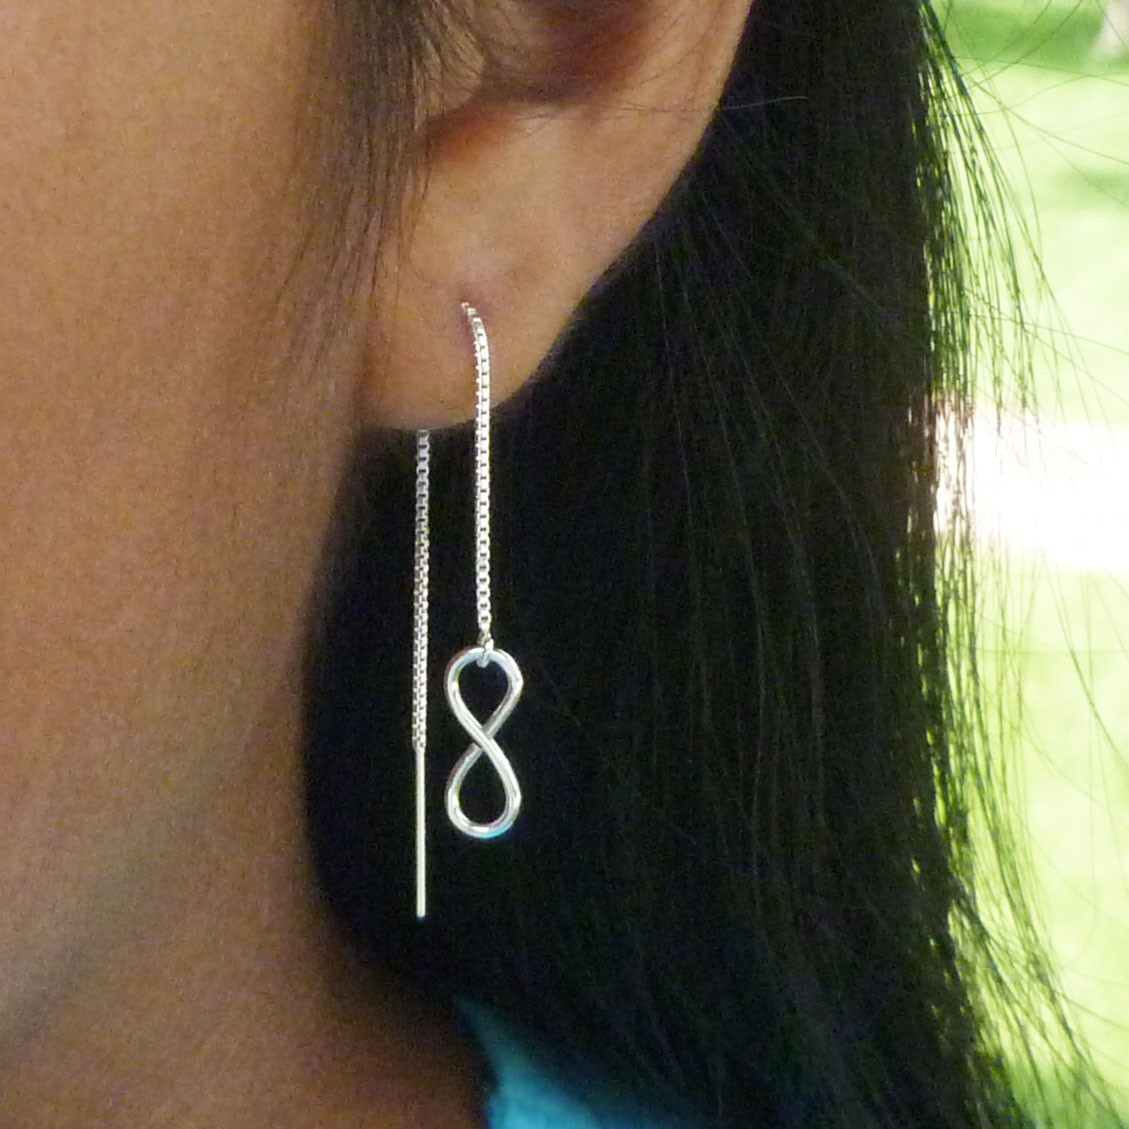 sterling silver Infinity threader earrings shown as an example of how they can be worn.